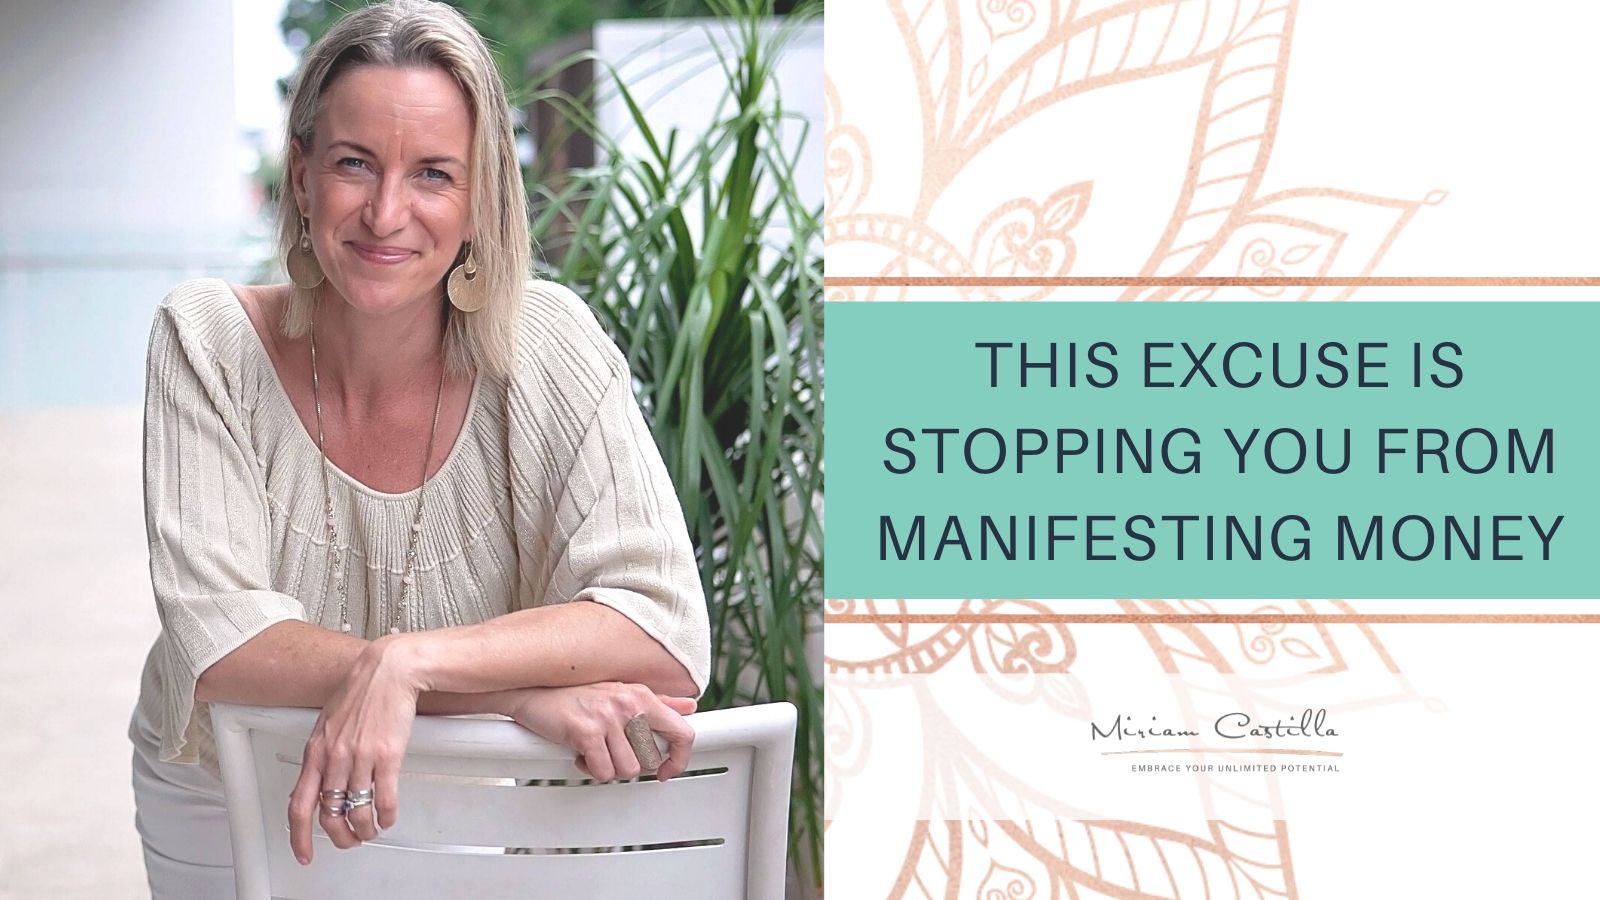 This excuse is stopping you from manifesting money